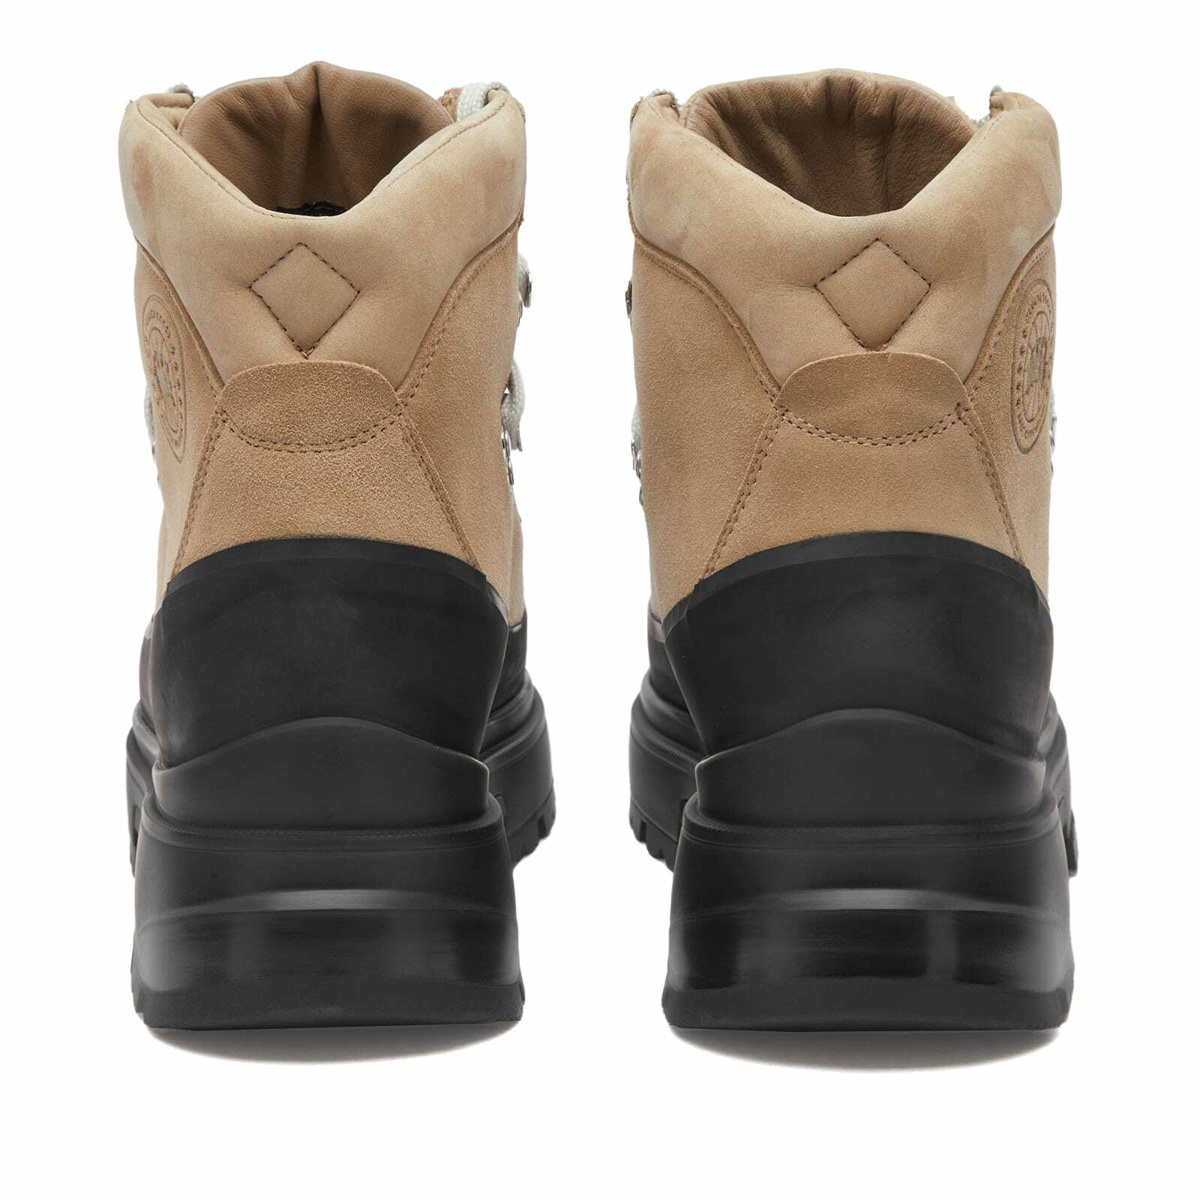 Canada Goose Journey ankle boots - Black